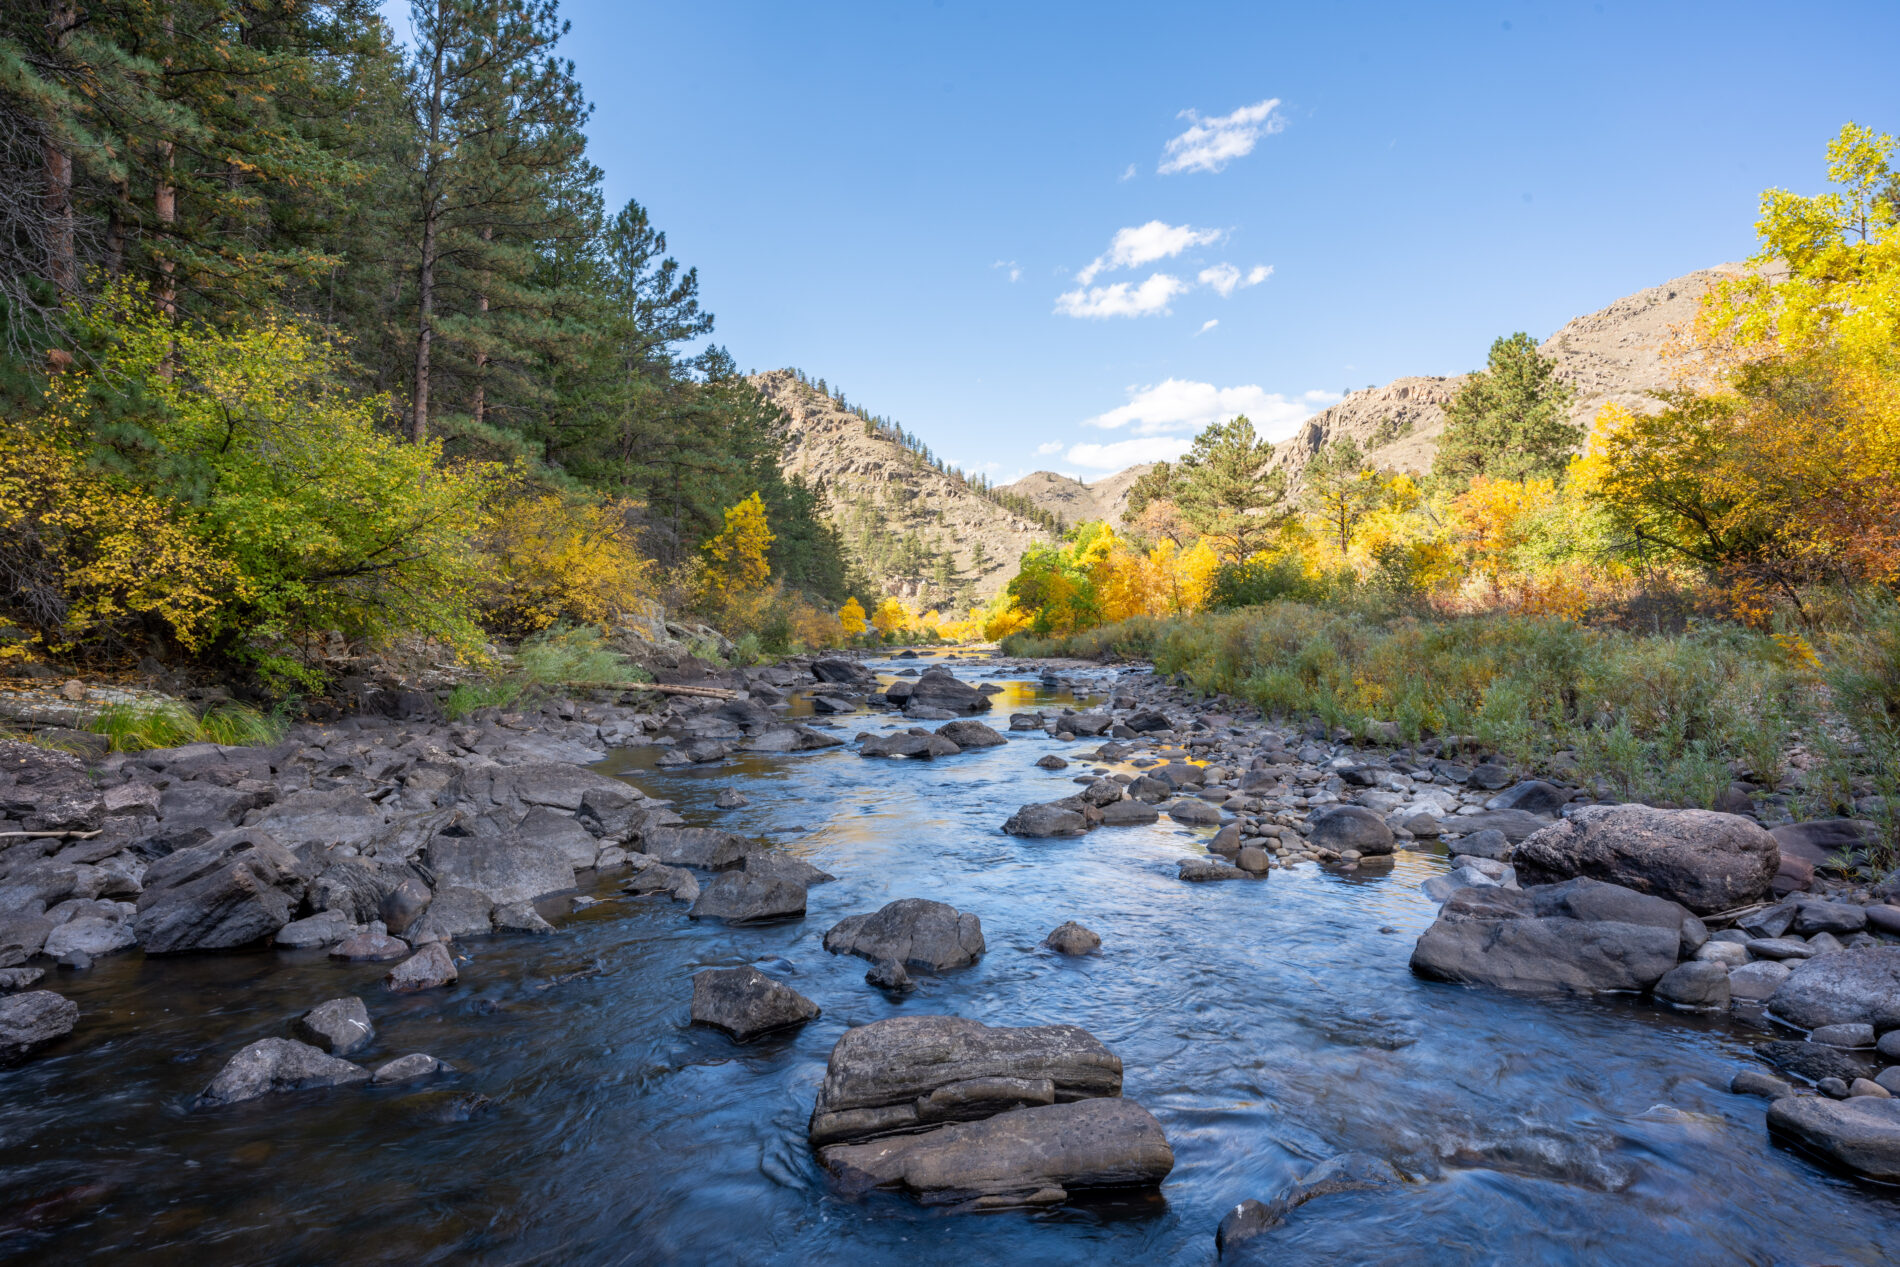 Press Release: Cache la Poudre River National Heritage Area Receives National Endowment for Humanities Grant